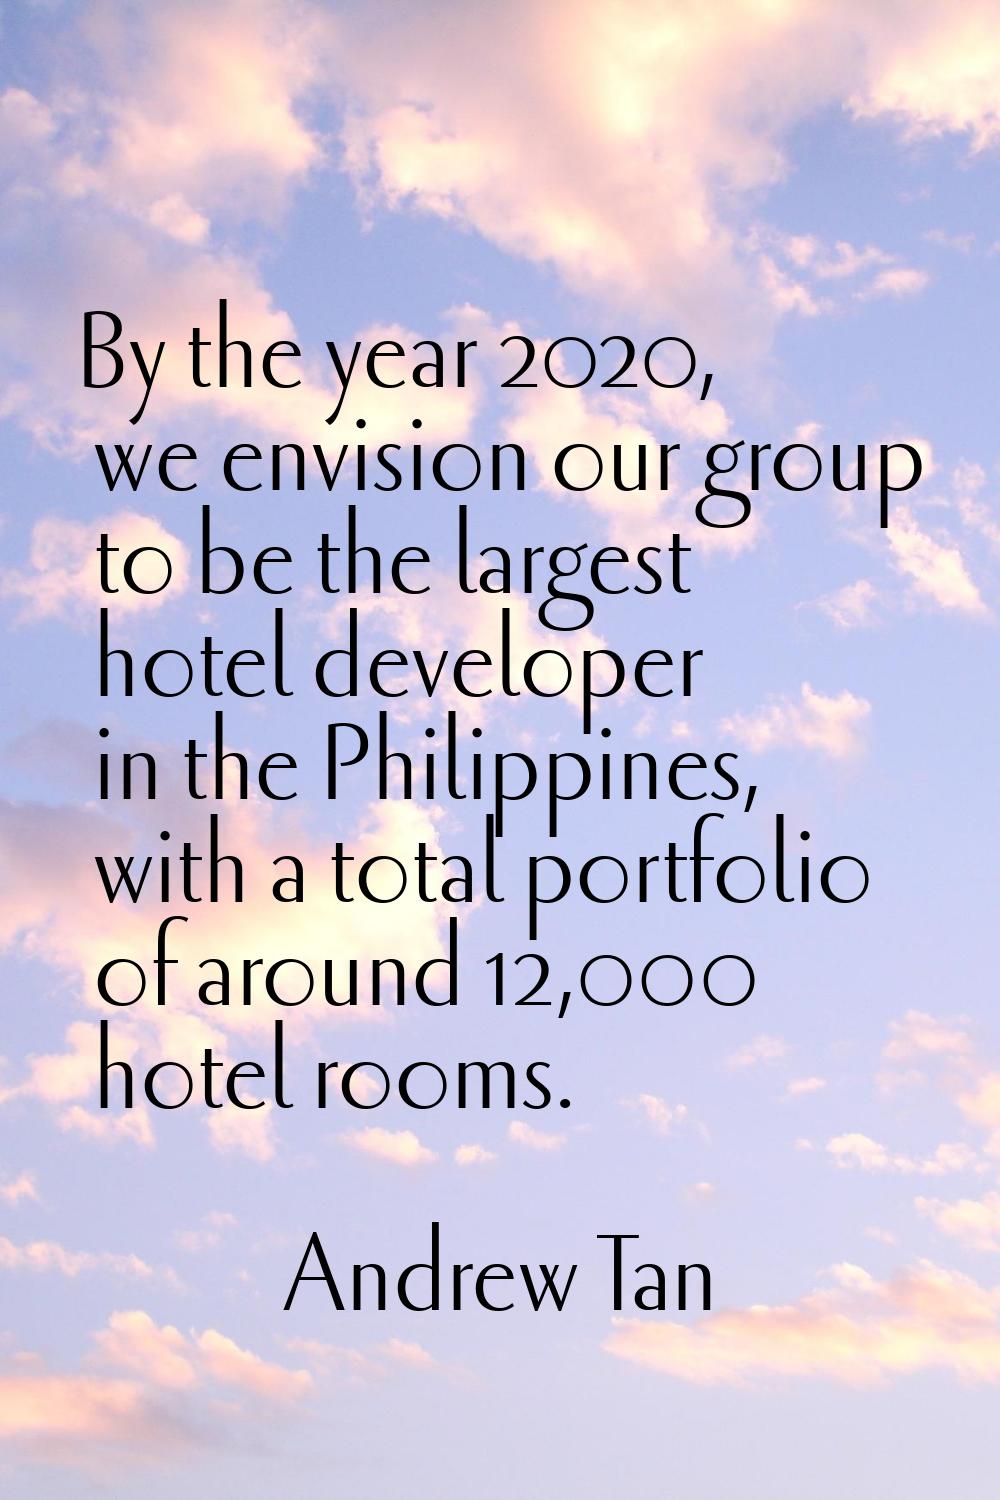 By the year 2020, we envision our group to be the largest hotel developer in the Philippines, with 